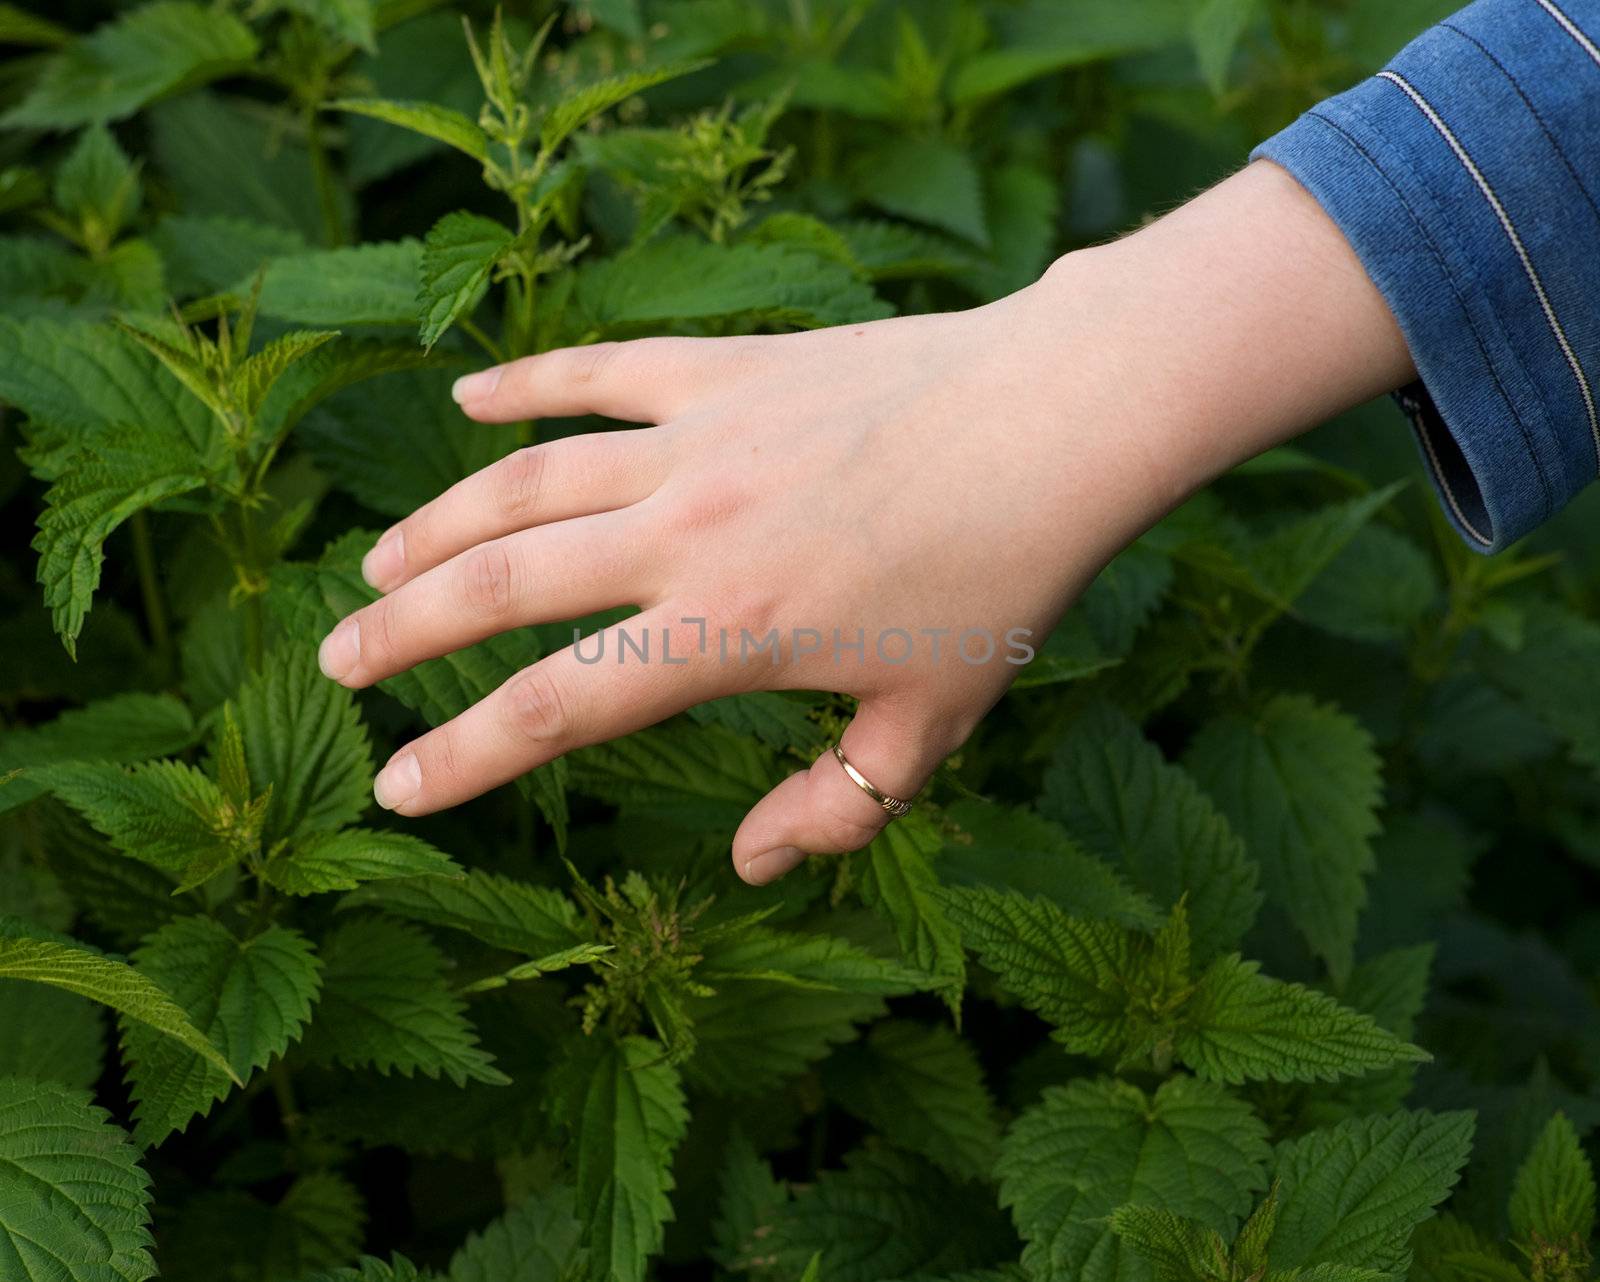 Hand and nettle by pzaxe